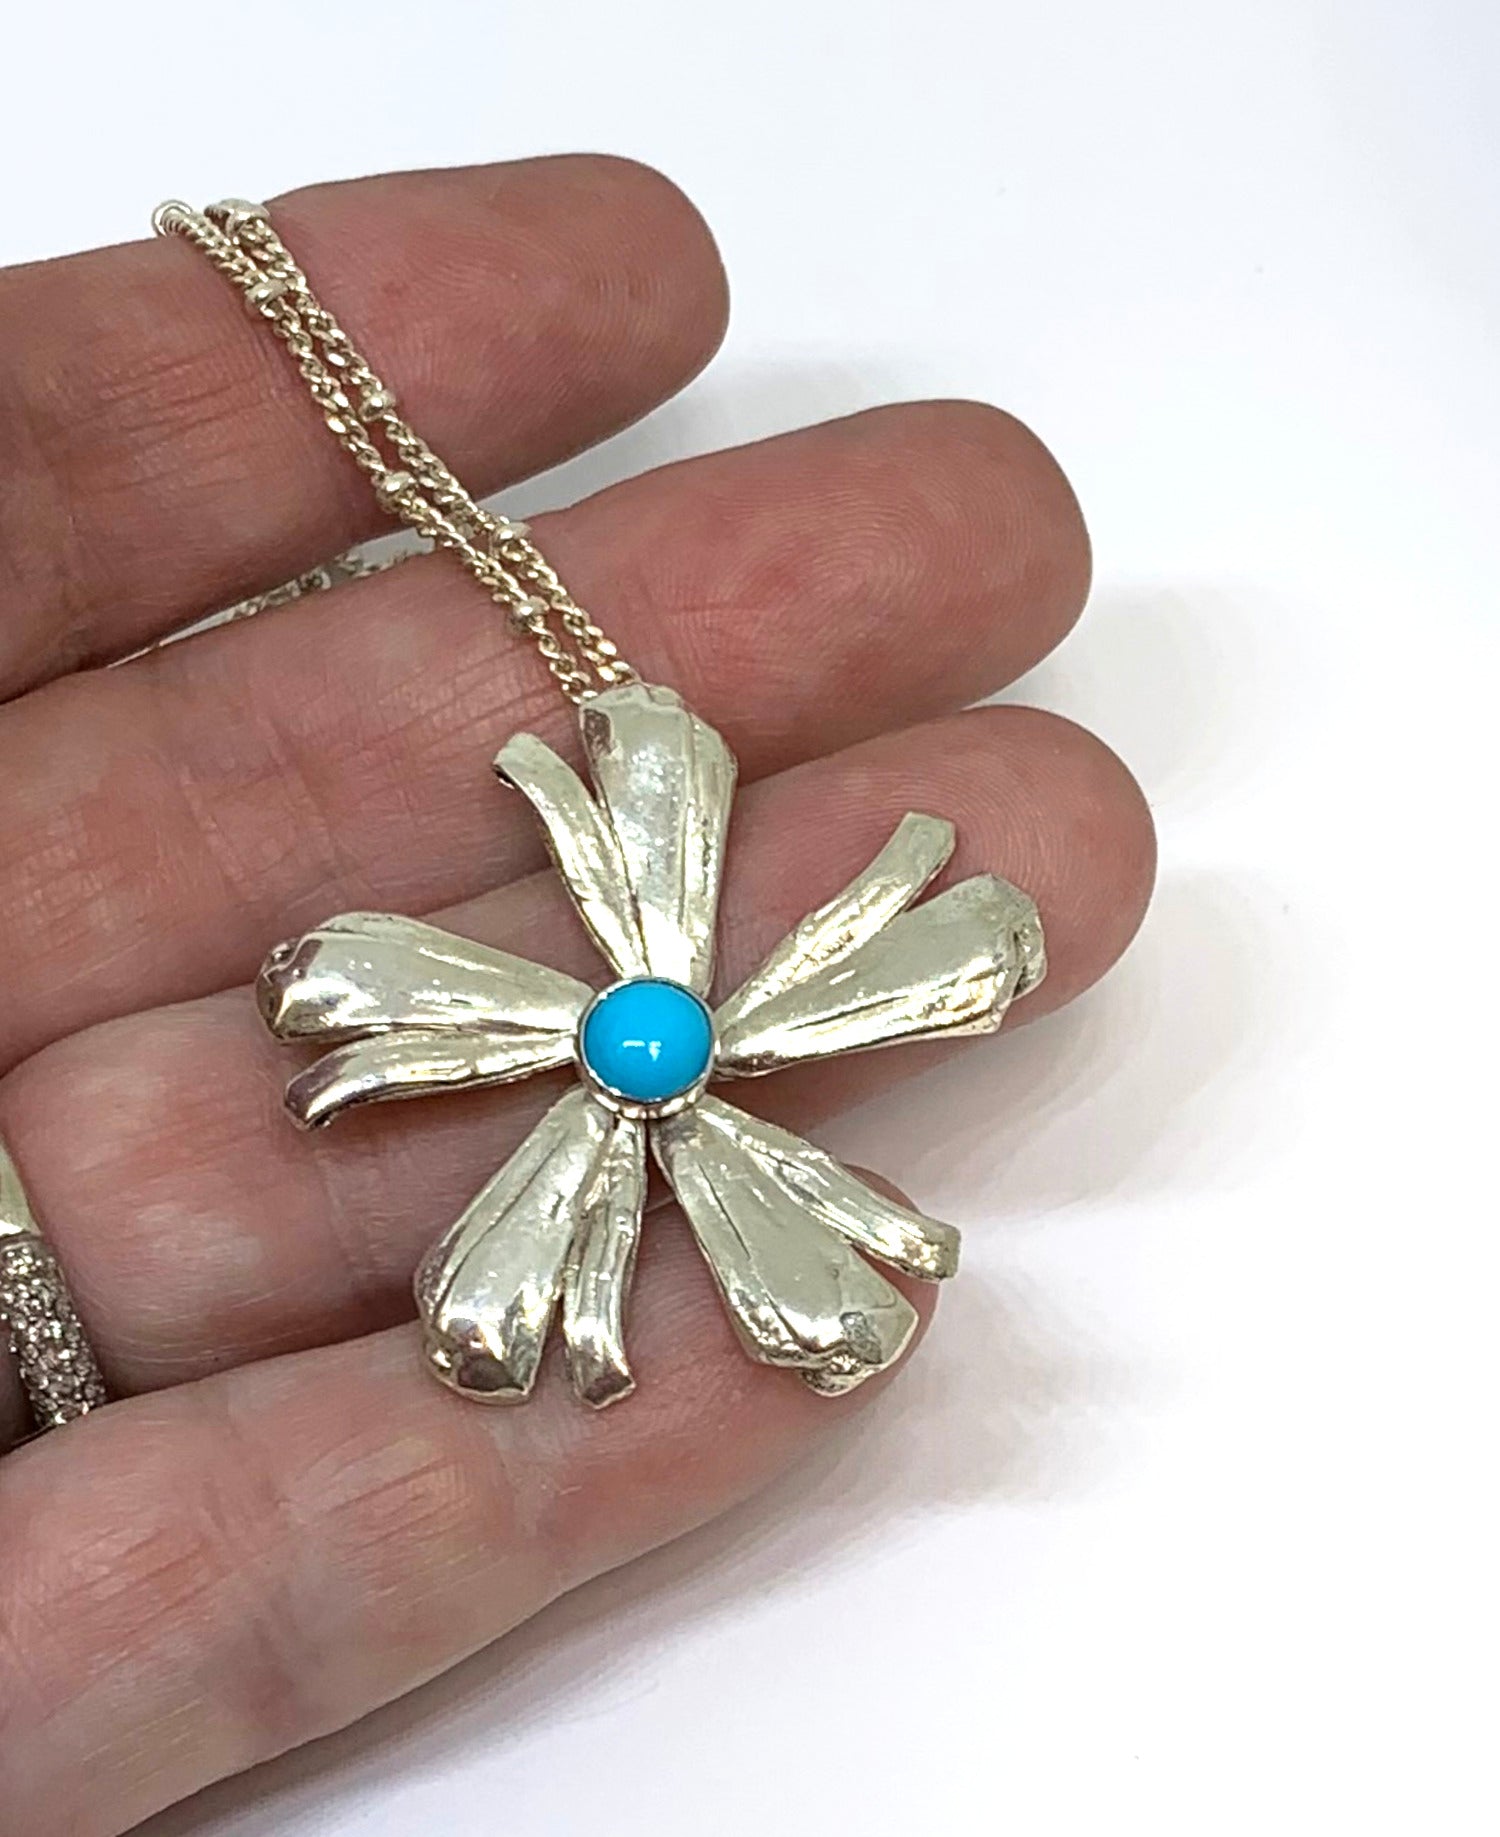 Flower Power Pendant with Sleeping Beauty Turquoise in Sterling Silver- Mitsuro Hikime Method